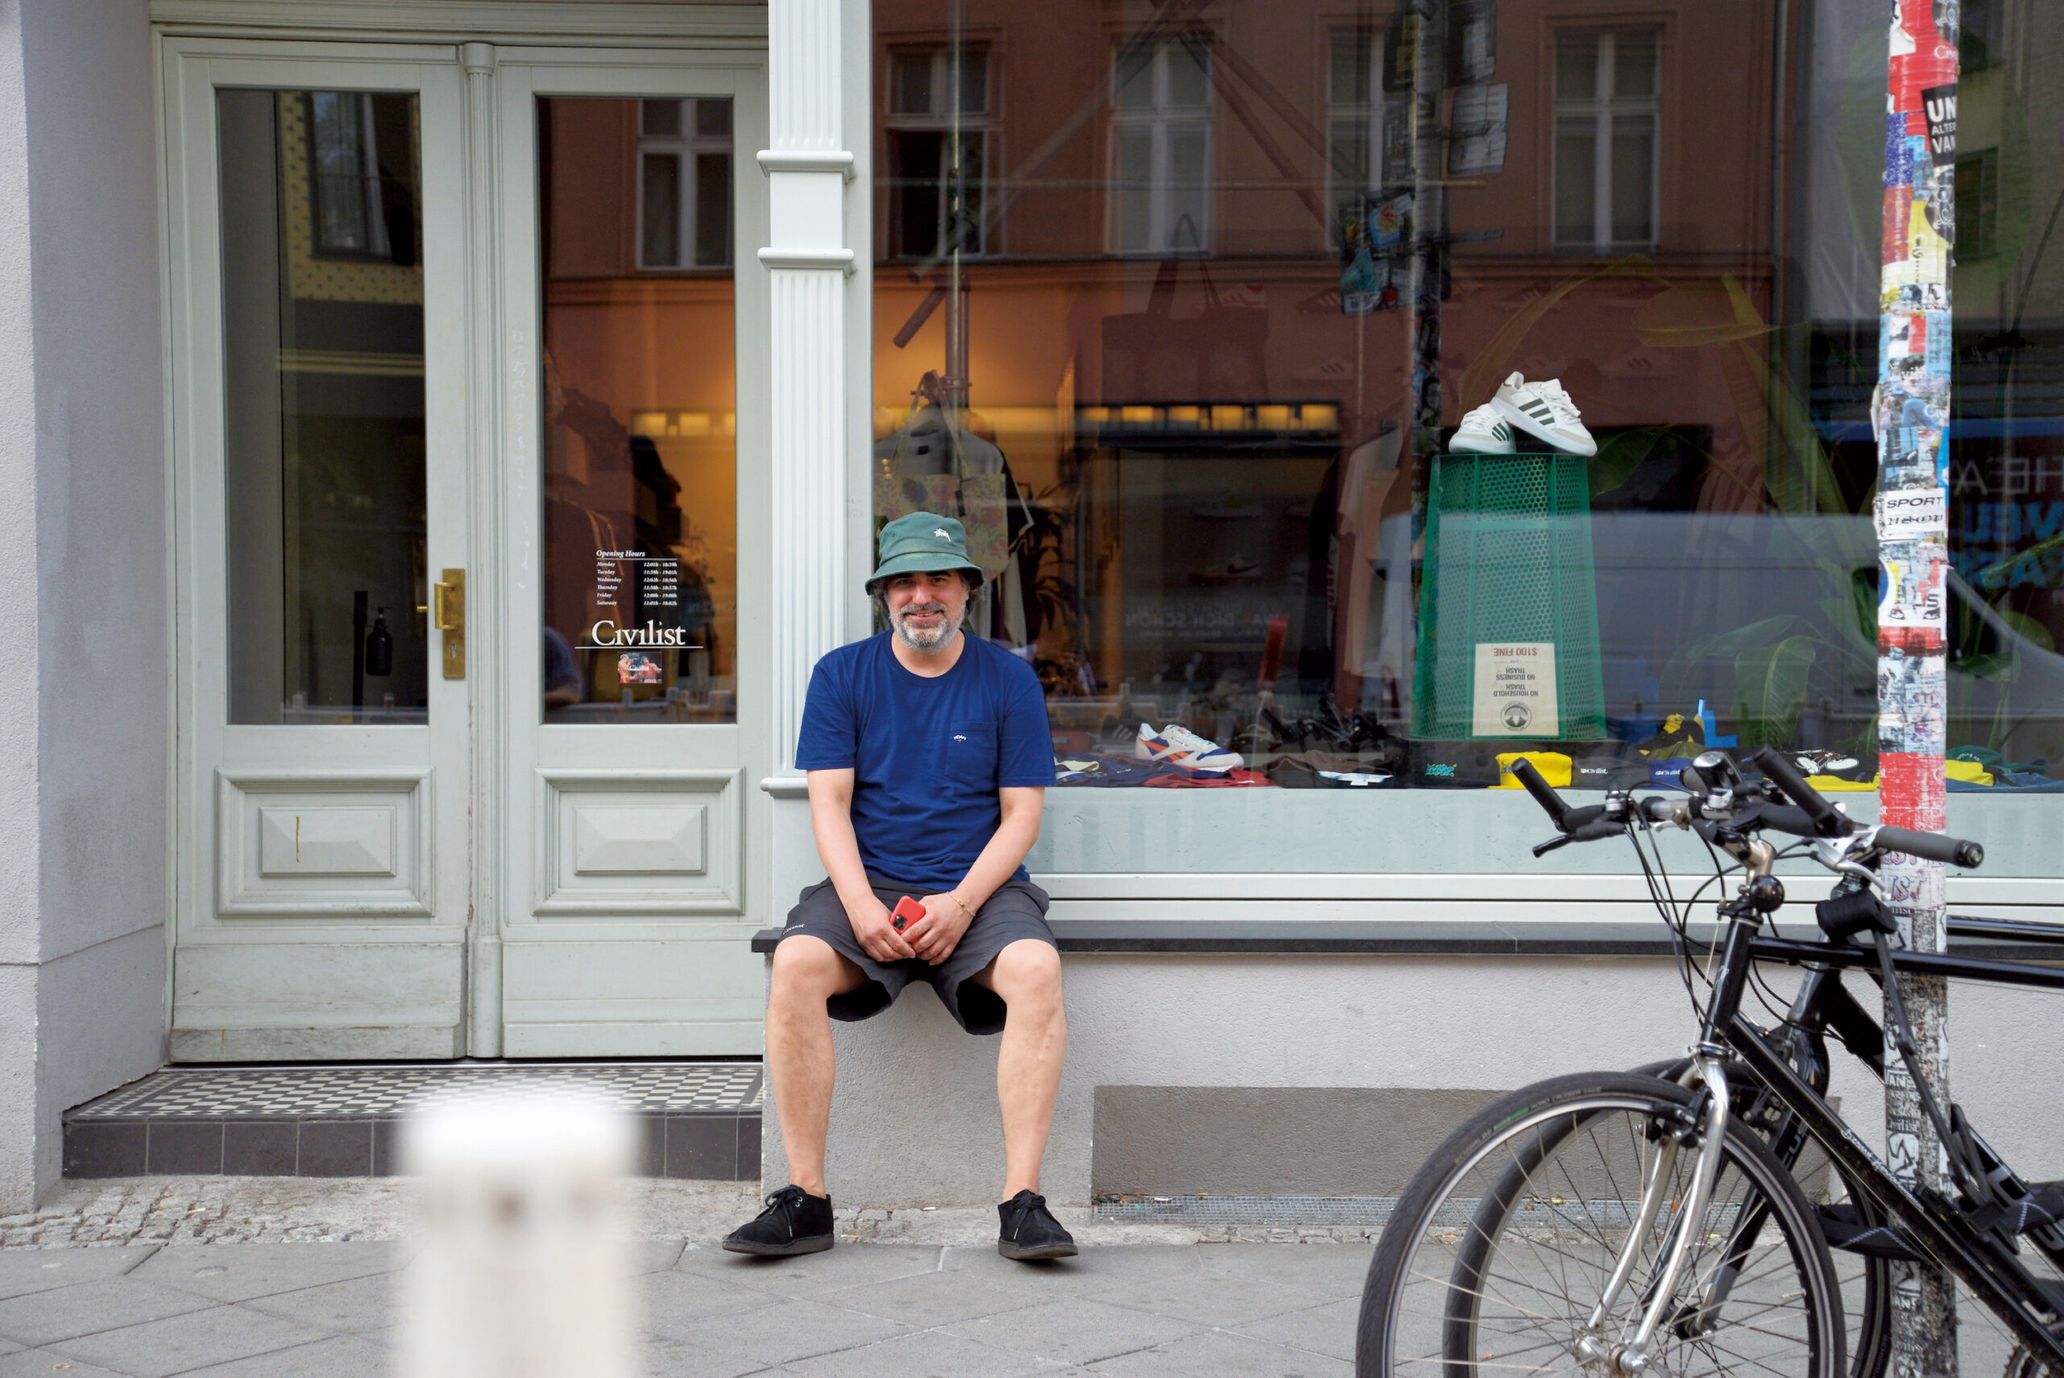 The reason Civilist, the heart of Berlin’s skateboarding scene, is loved by both locals and the world